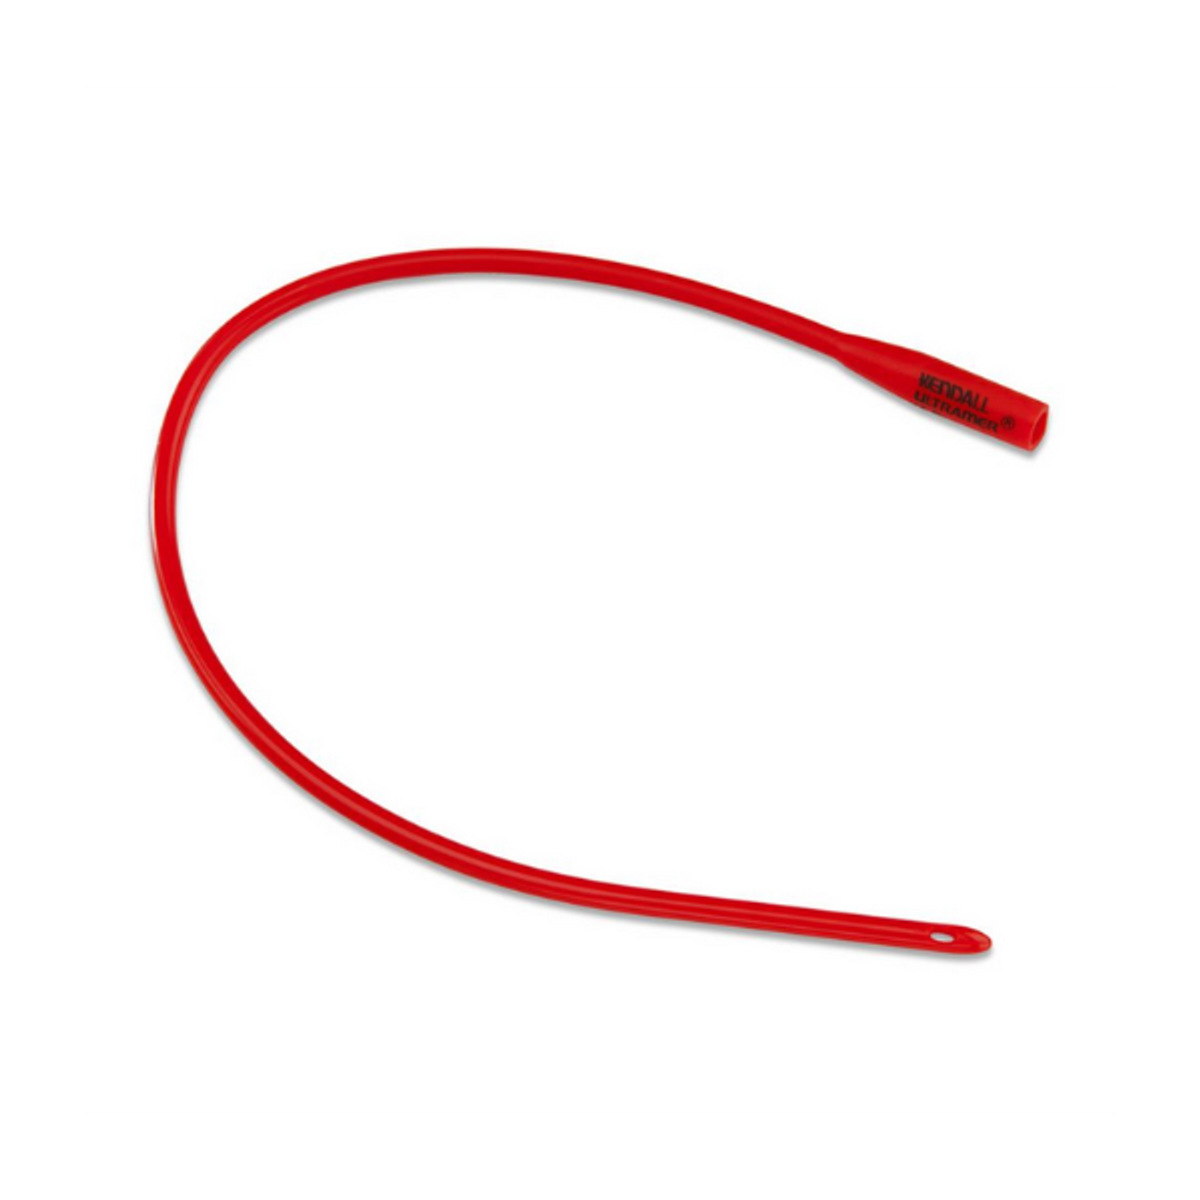 Cardinal Health Curity Ultramer Urethral Red Rubber Catheters